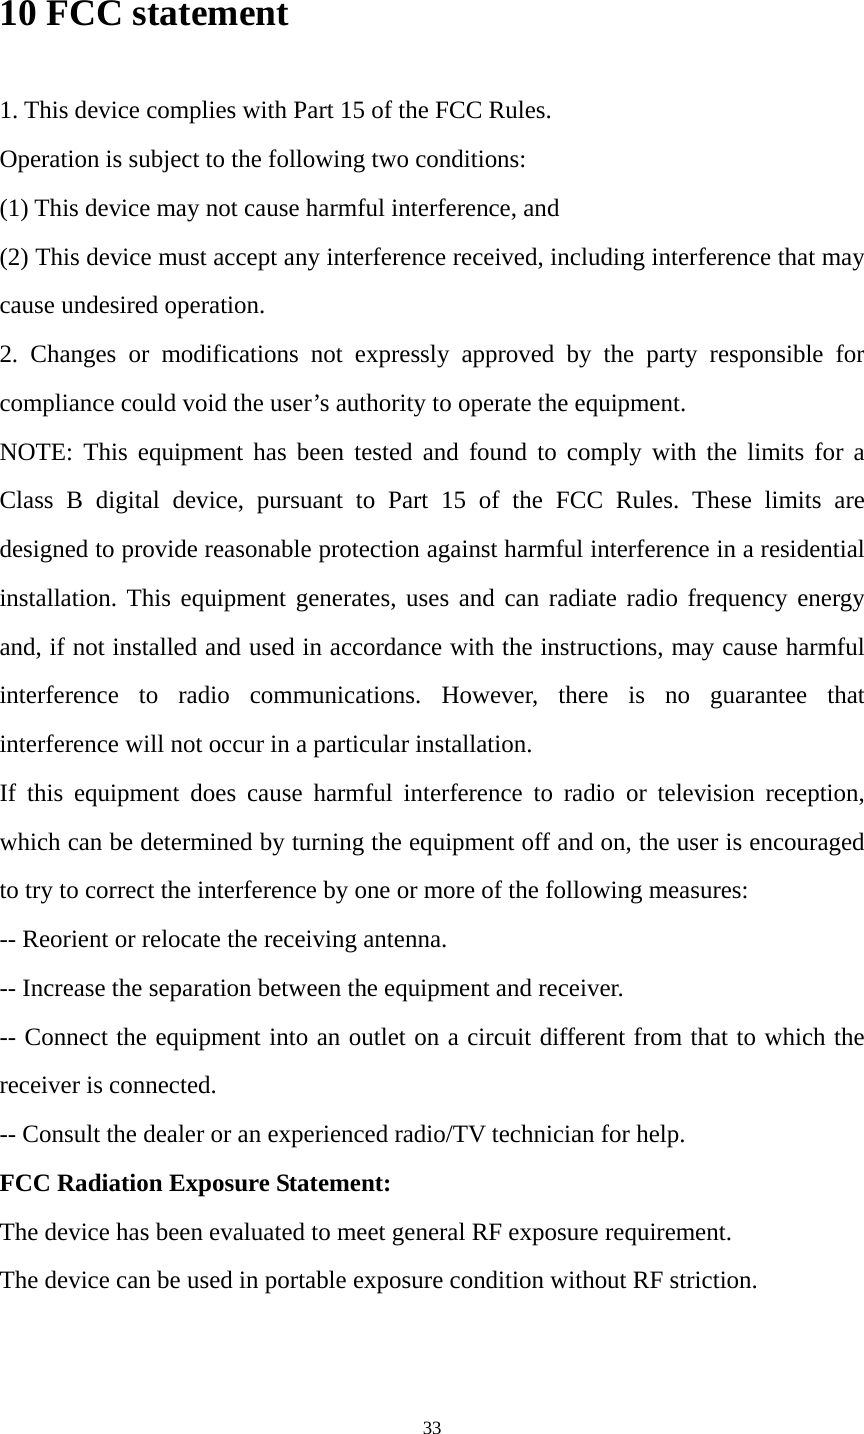 33 10 FCC statement 1. This device complies with Part 15 of the FCC Rules. Operation is subject to the following two conditions: (1) This device may not cause harmful interference, and (2) This device must accept any interference received, including interference that may cause undesired operation. 2. Changes or modifications not expressly approved by the party responsible for compliance could void the user’s authority to operate the equipment. NOTE: This equipment has been tested and found to comply with the limits for a Class B digital device, pursuant to Part 15 of the FCC Rules. These limits are designed to provide reasonable protection against harmful interference in a residential installation. This equipment generates, uses and can radiate radio frequency energy and, if not installed and used in accordance with the instructions, may cause harmful interference to radio communications. However, there is no guarantee that interference will not occur in a particular installation. If this equipment does cause harmful interference to radio or television reception, which can be determined by turning the equipment off and on, the user is encouraged to try to correct the interference by one or more of the following measures: -- Reorient or relocate the receiving antenna. -- Increase the separation between the equipment and receiver. -- Connect the equipment into an outlet on a circuit different from that to which the receiver is connected. -- Consult the dealer or an experienced radio/TV technician for help. FCC Radiation Exposure Statement:   The device has been evaluated to meet general RF exposure requirement.   The device can be used in portable exposure condition without RF striction.   